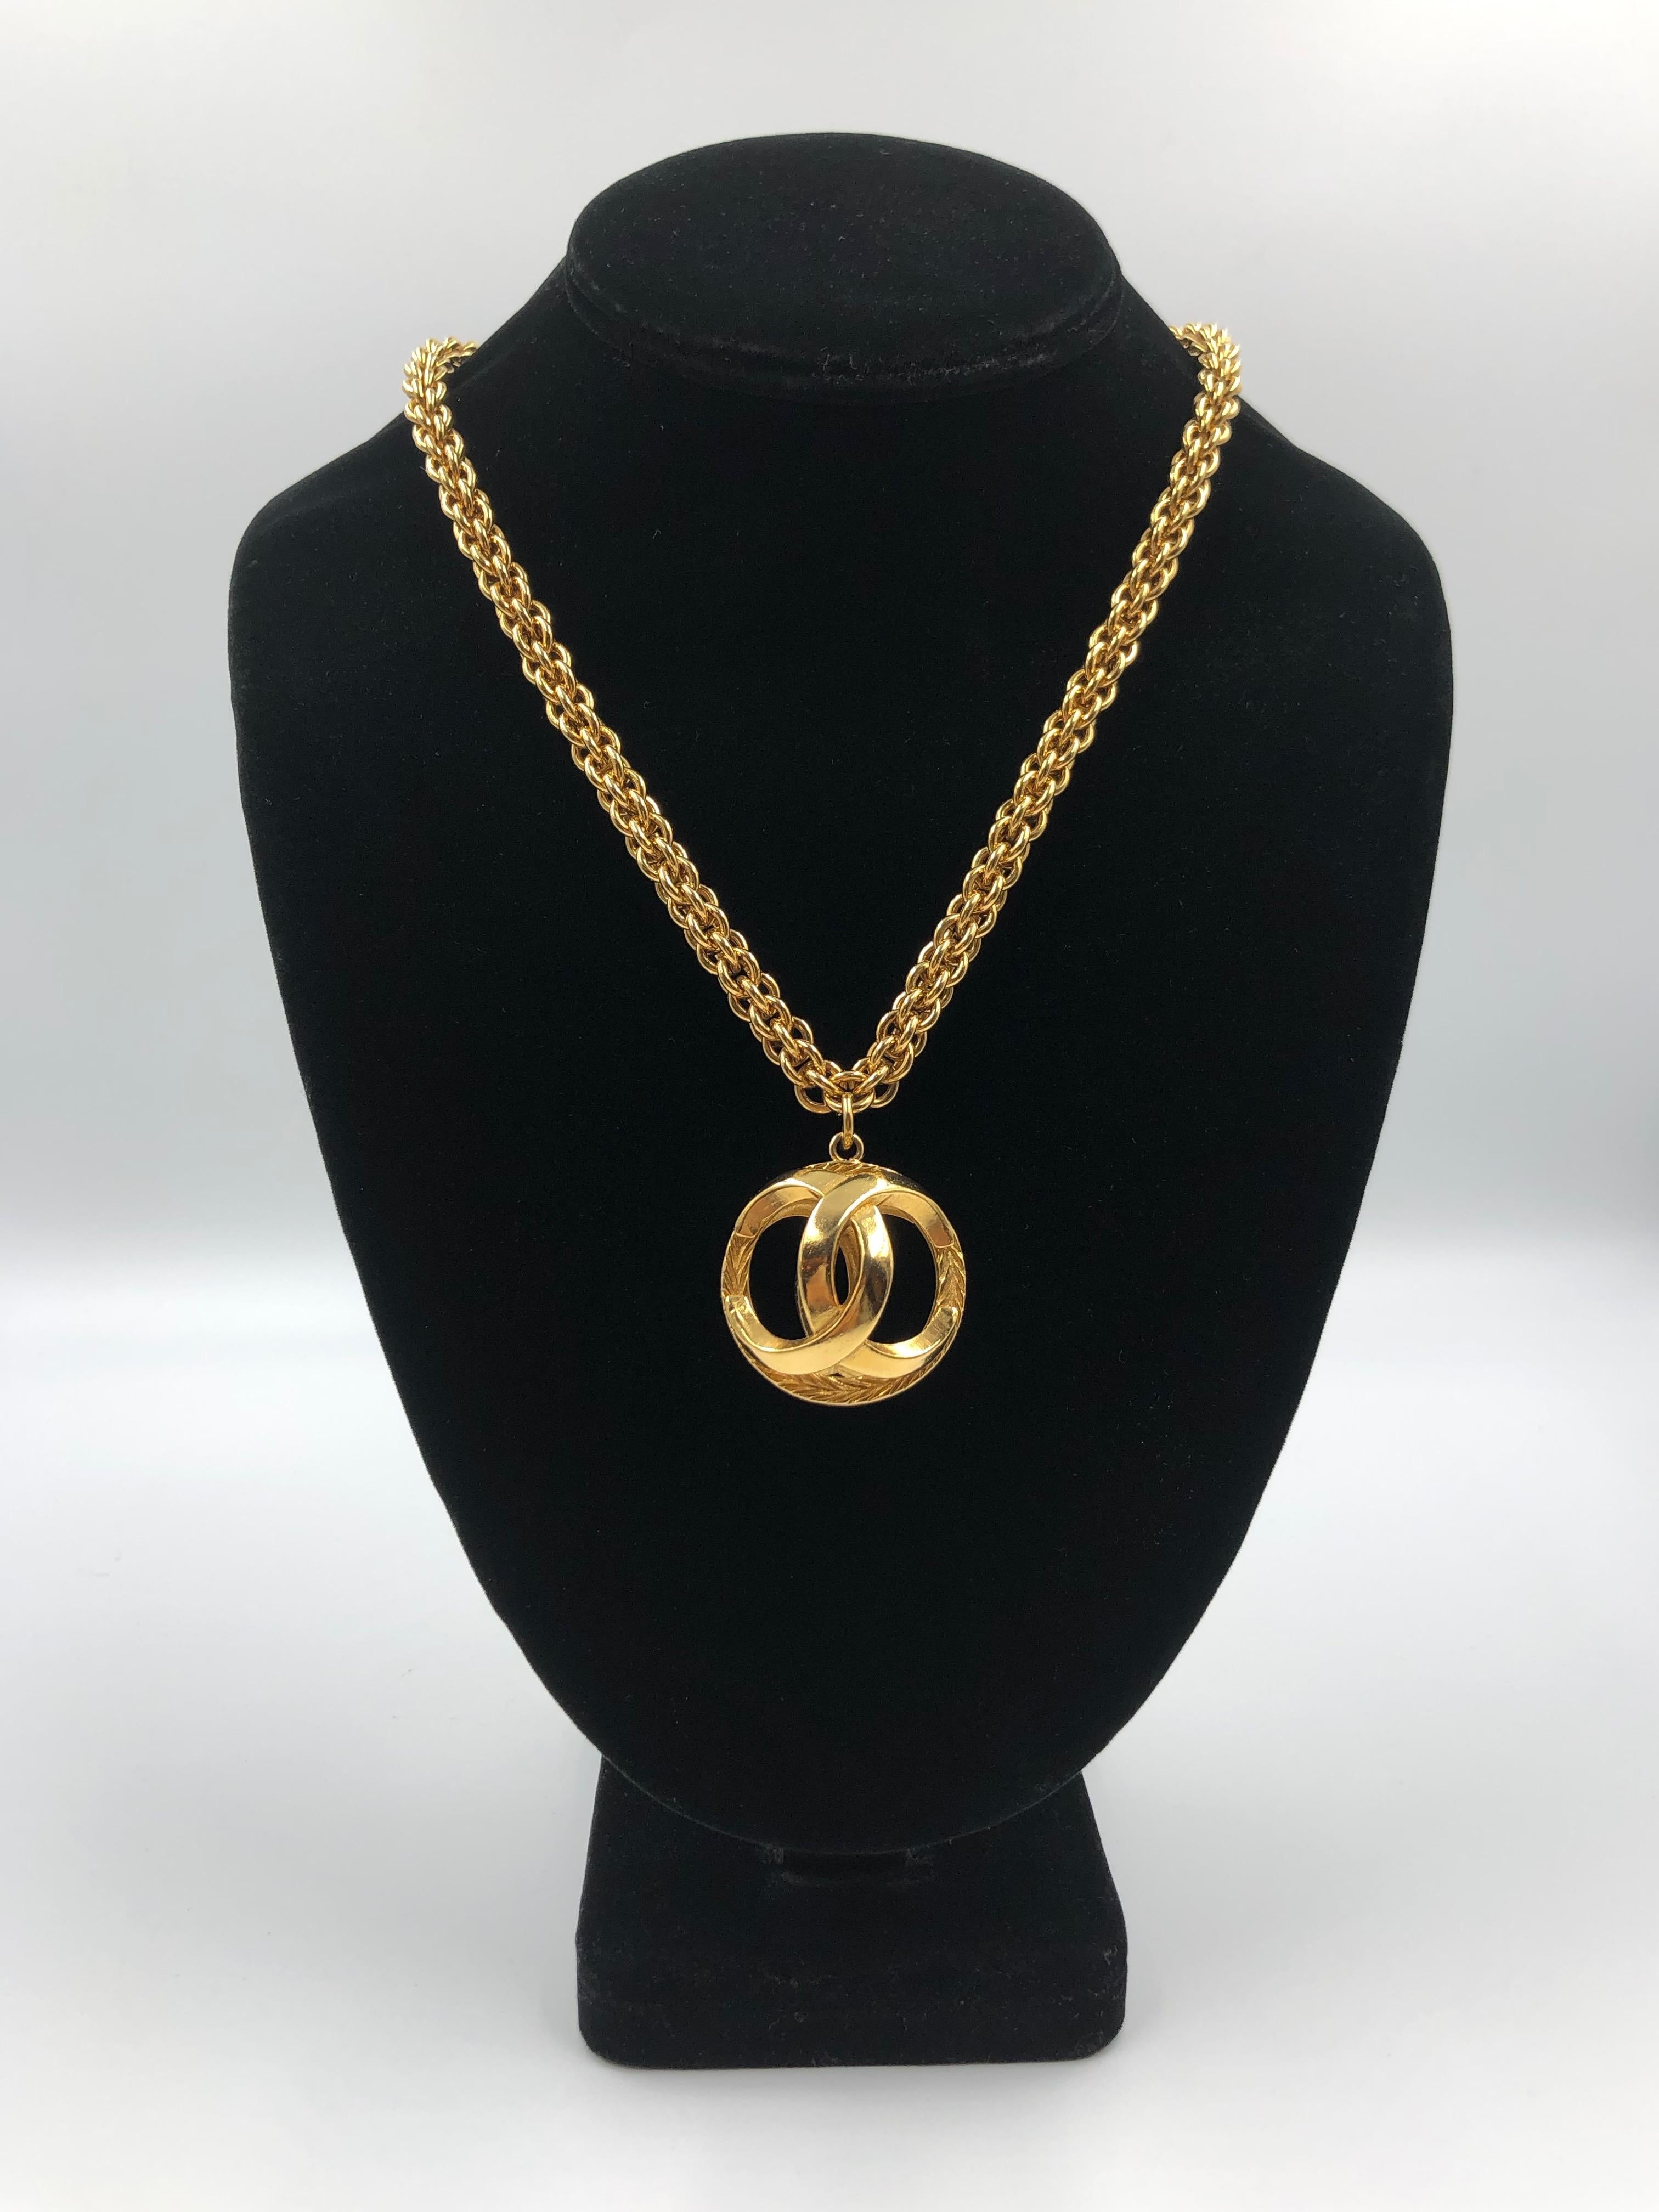 Chanel 1980's Gold Tone Necklace with 3D Orb Monogram Double CC Pendant

Length (Doubled): 18